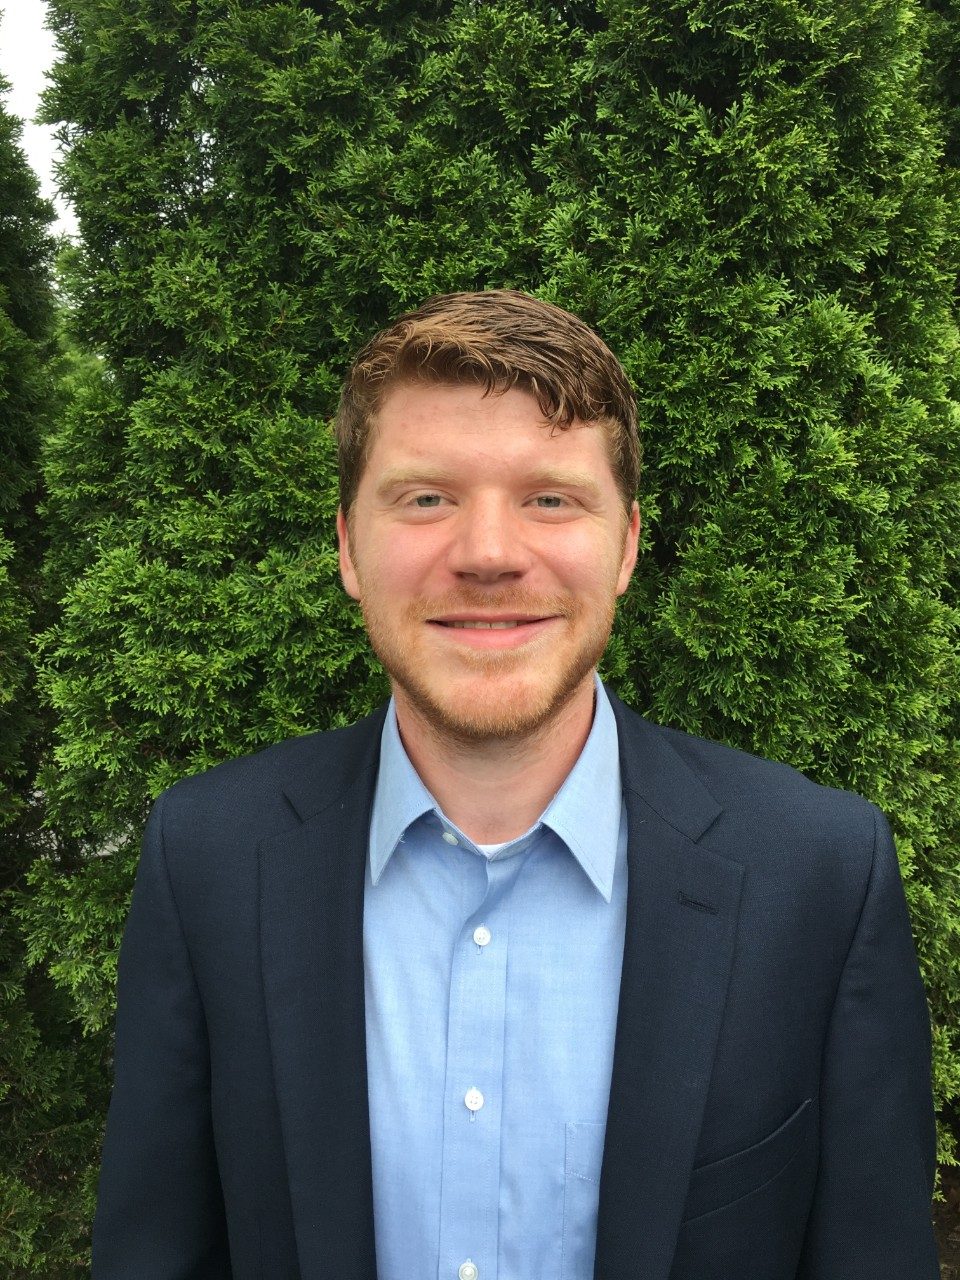 As a student, Jake studied German, materials science, and engineering. Hestarted his career with Evonik Corporation, a German specialty chemicals company. He works as a technical service representative and travels to Germany several times per year to engage in global meetings with German colleagues.